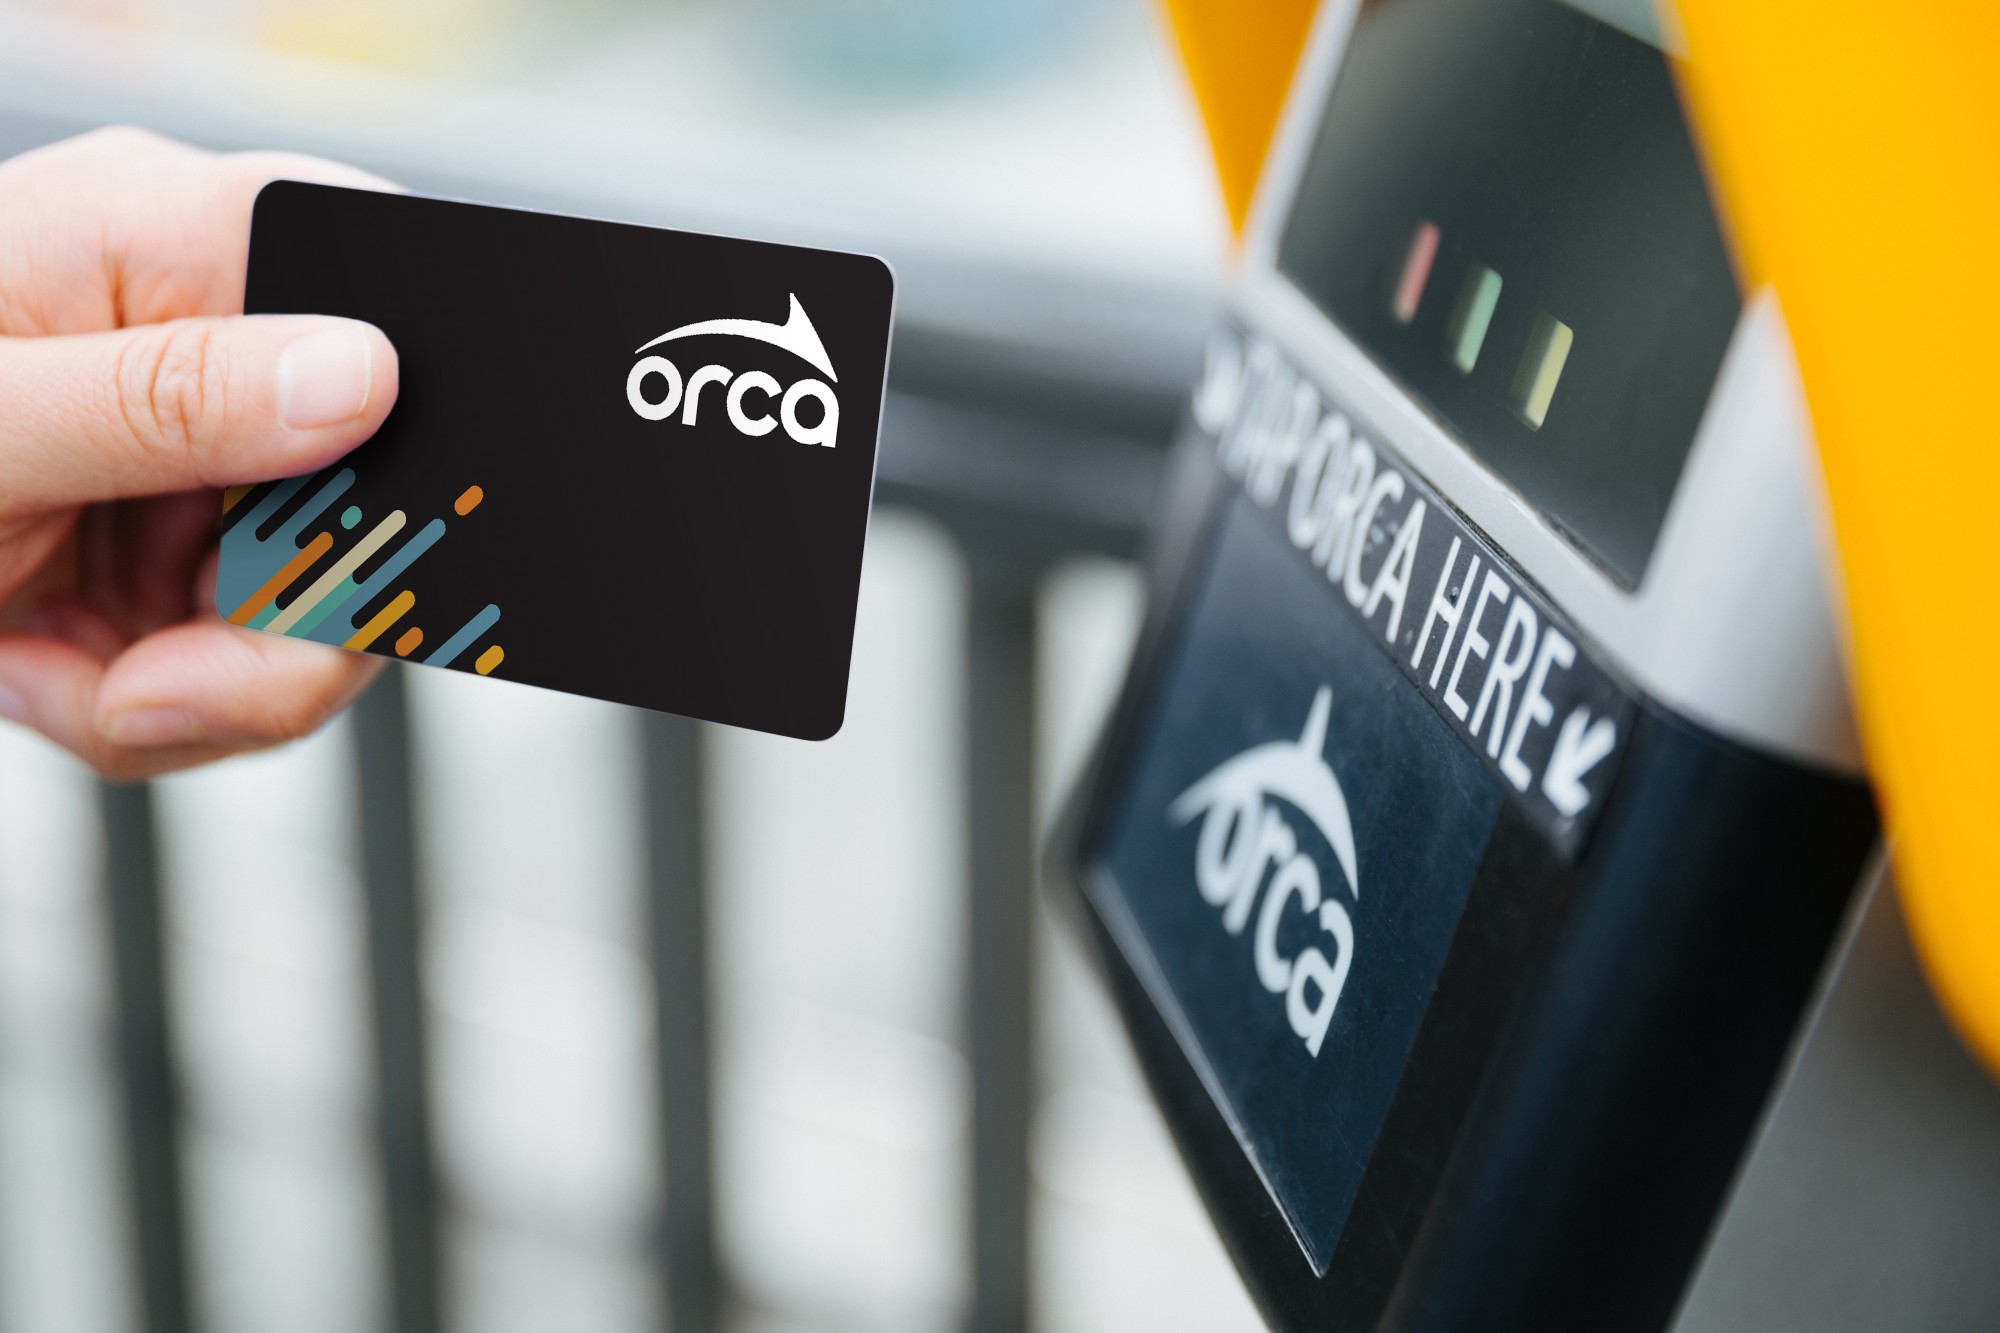 New ORCA system for regional transit launched - The B-Town (Burien) Blog